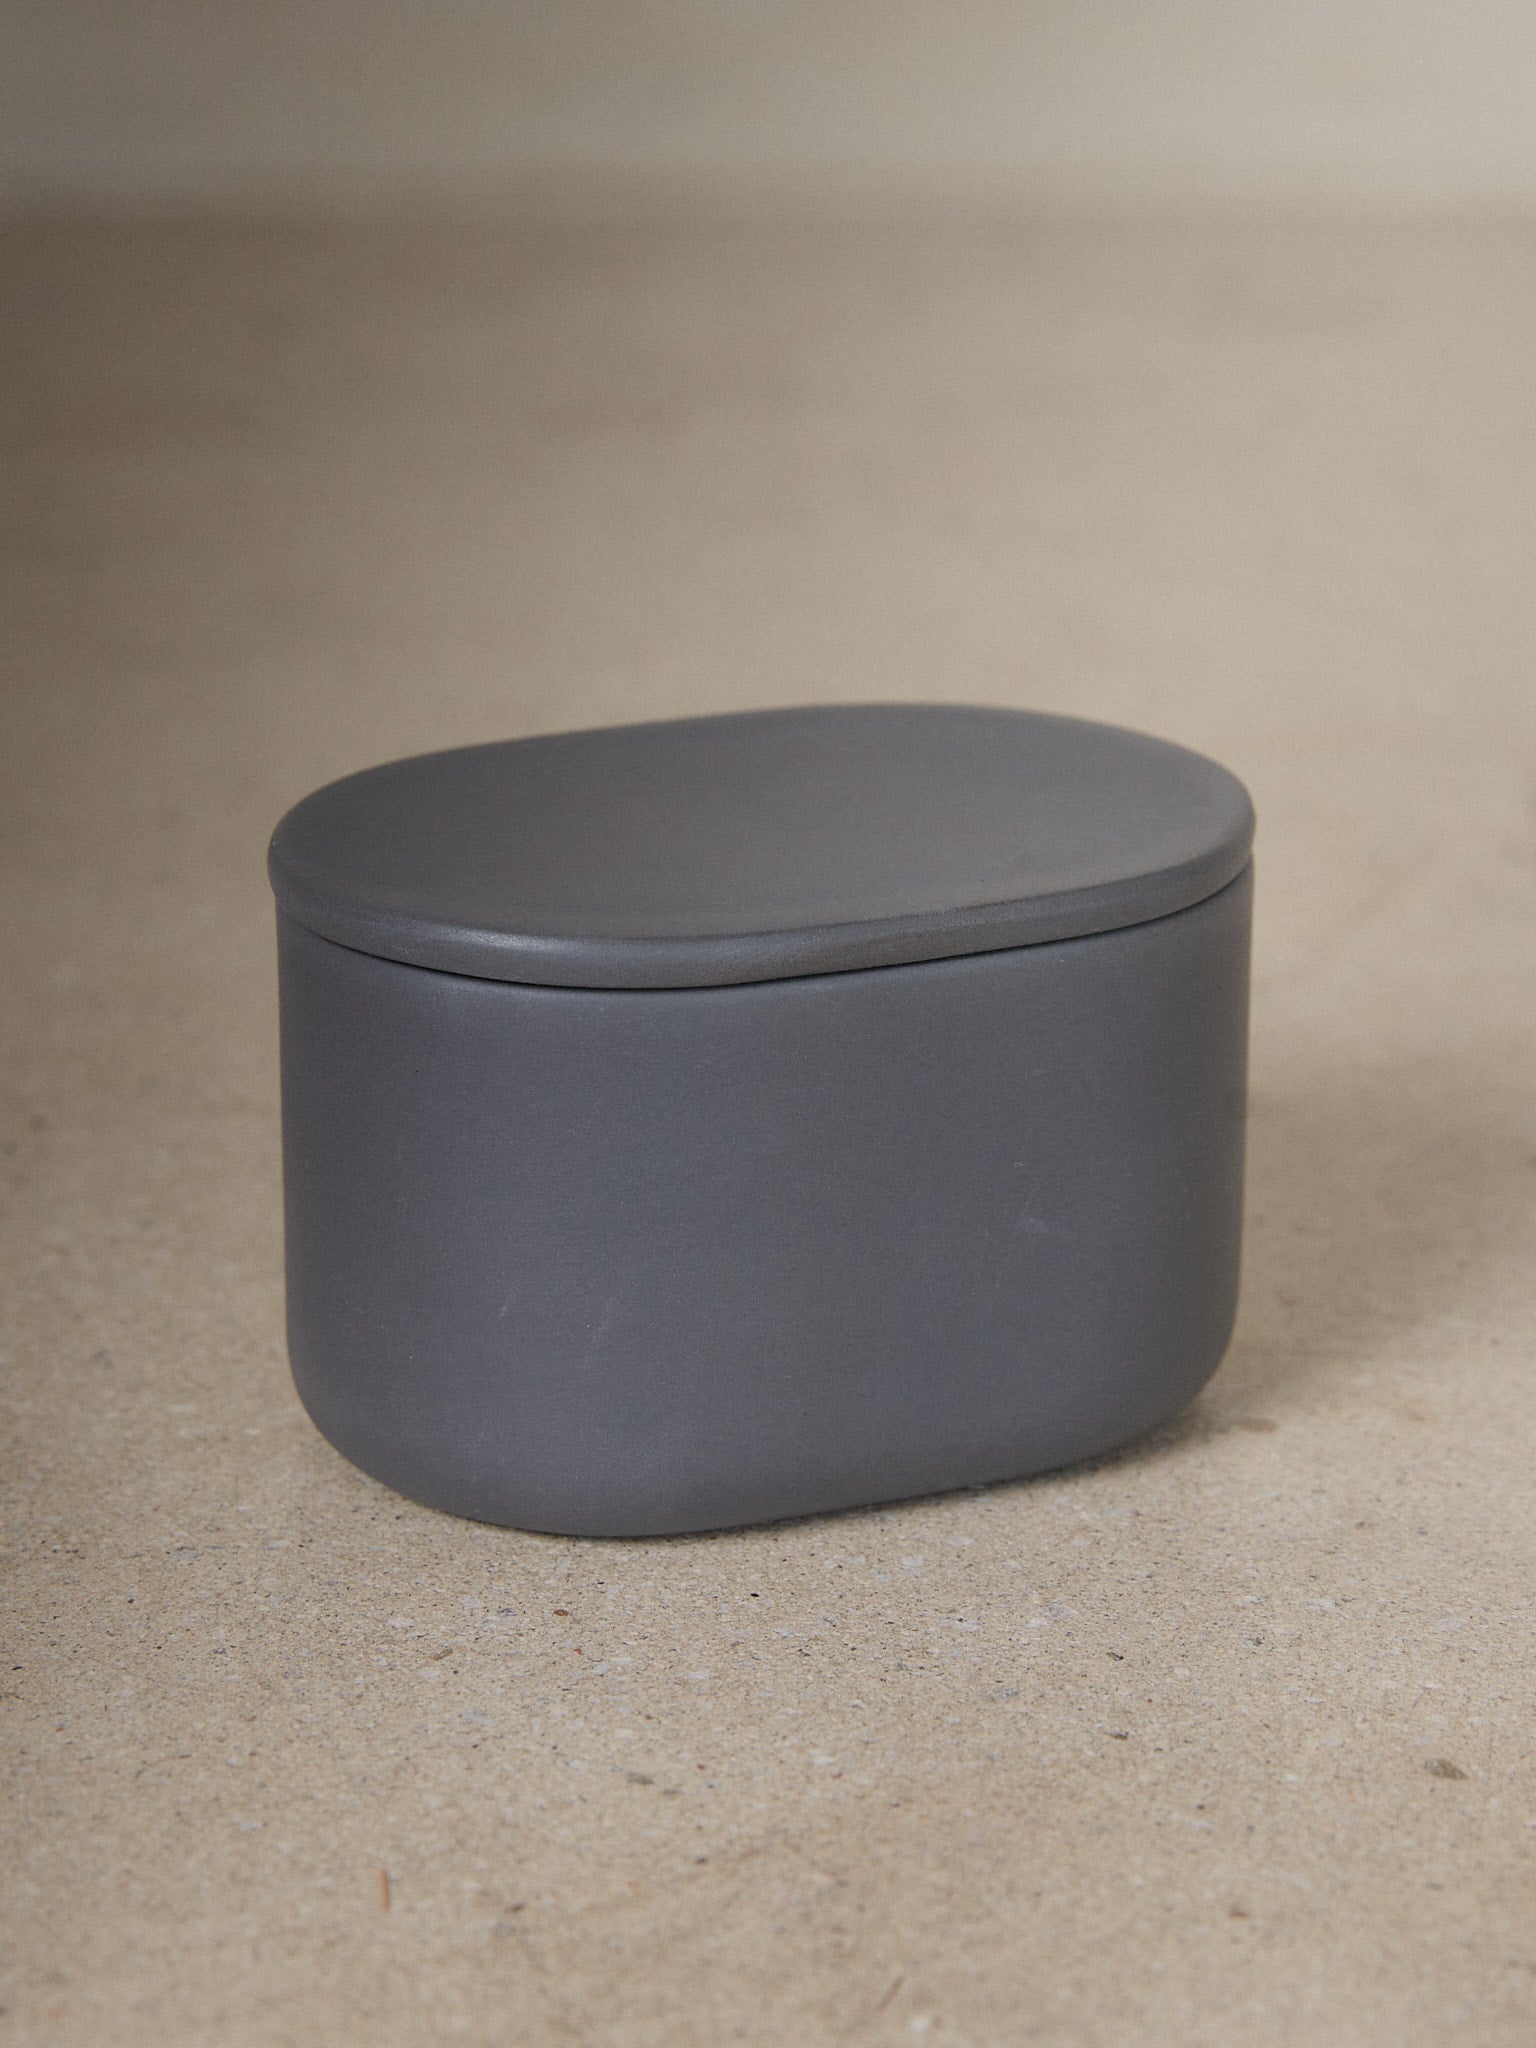 Dark Grey Cose Oval Box. A study in refined simplicity, the Cose Oval Box by Bertrand Lejoly for Serax adds subtle luxury to any bathroom or kitchen. 